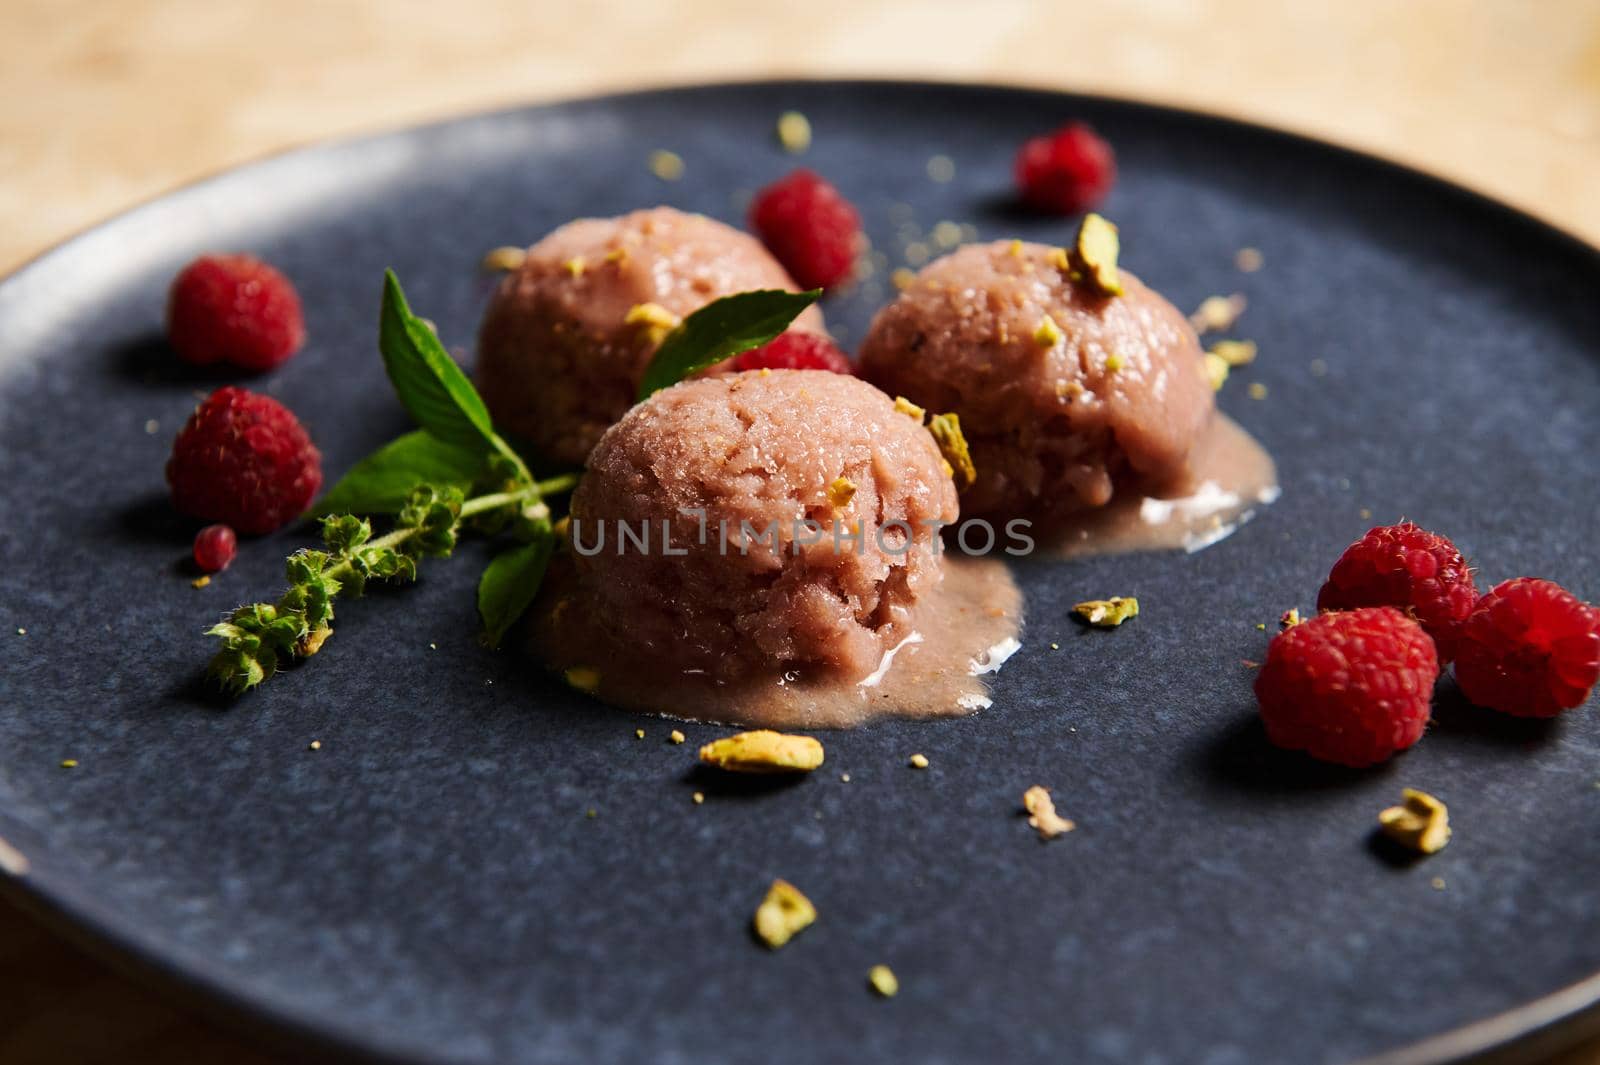 Cropped view of frozen balls with homemade, dairy free berry sorbet, garnished with grated pistachios, raspberries and basil lemon leaves on blue navy plate. Food still life. Selective focus. Close-up